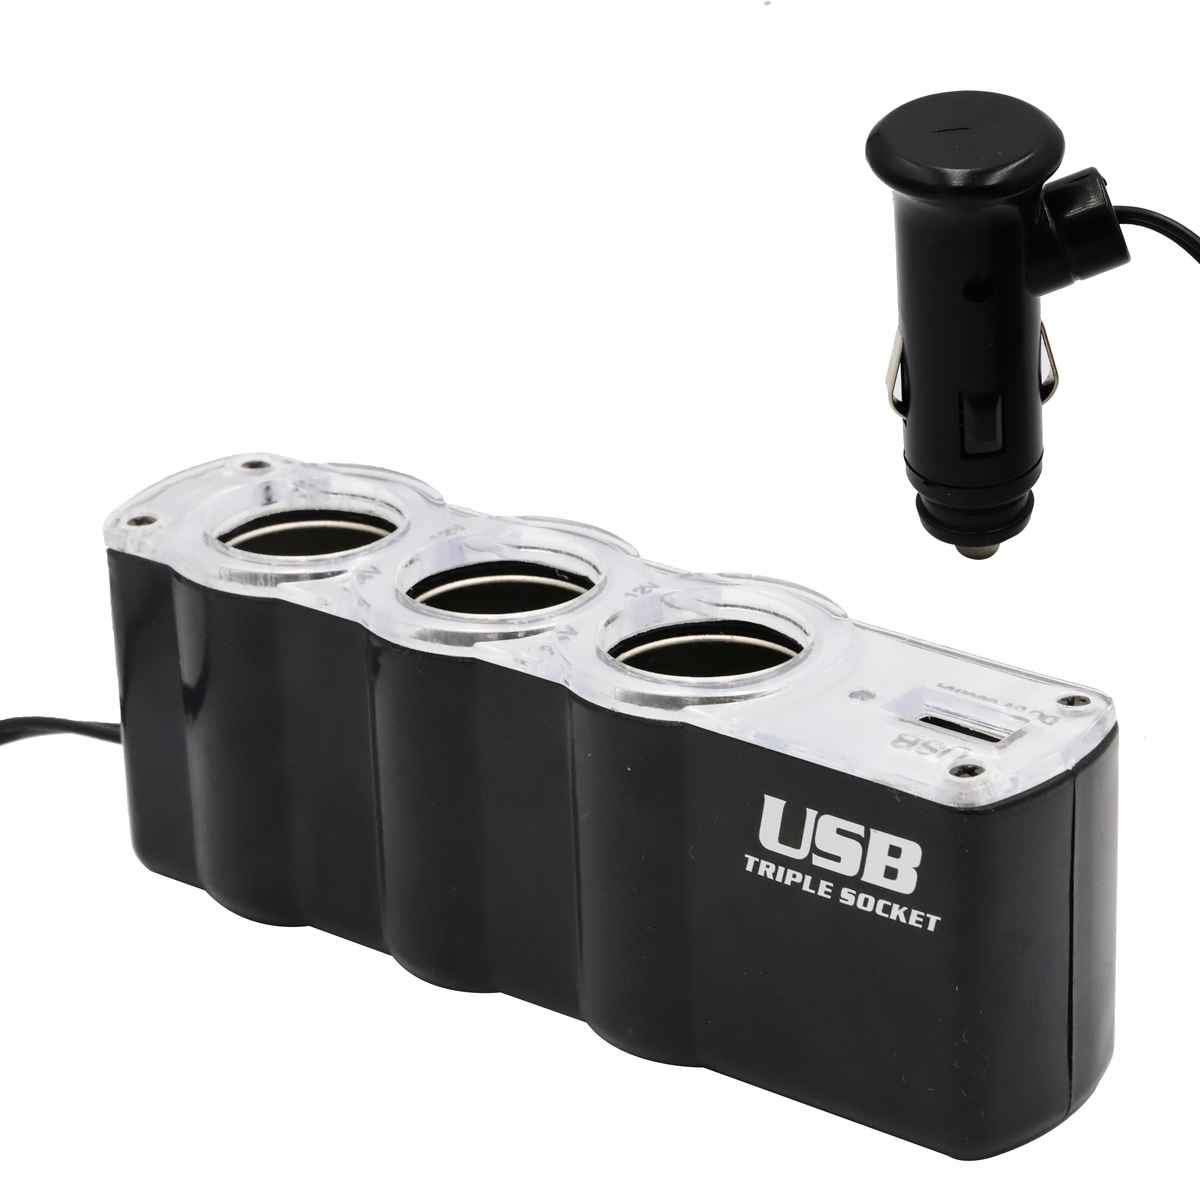 7. LM-CR-SH03 Triple Socket Charger Bulk Purchase and Corporate purchase from China Union Power -Description-